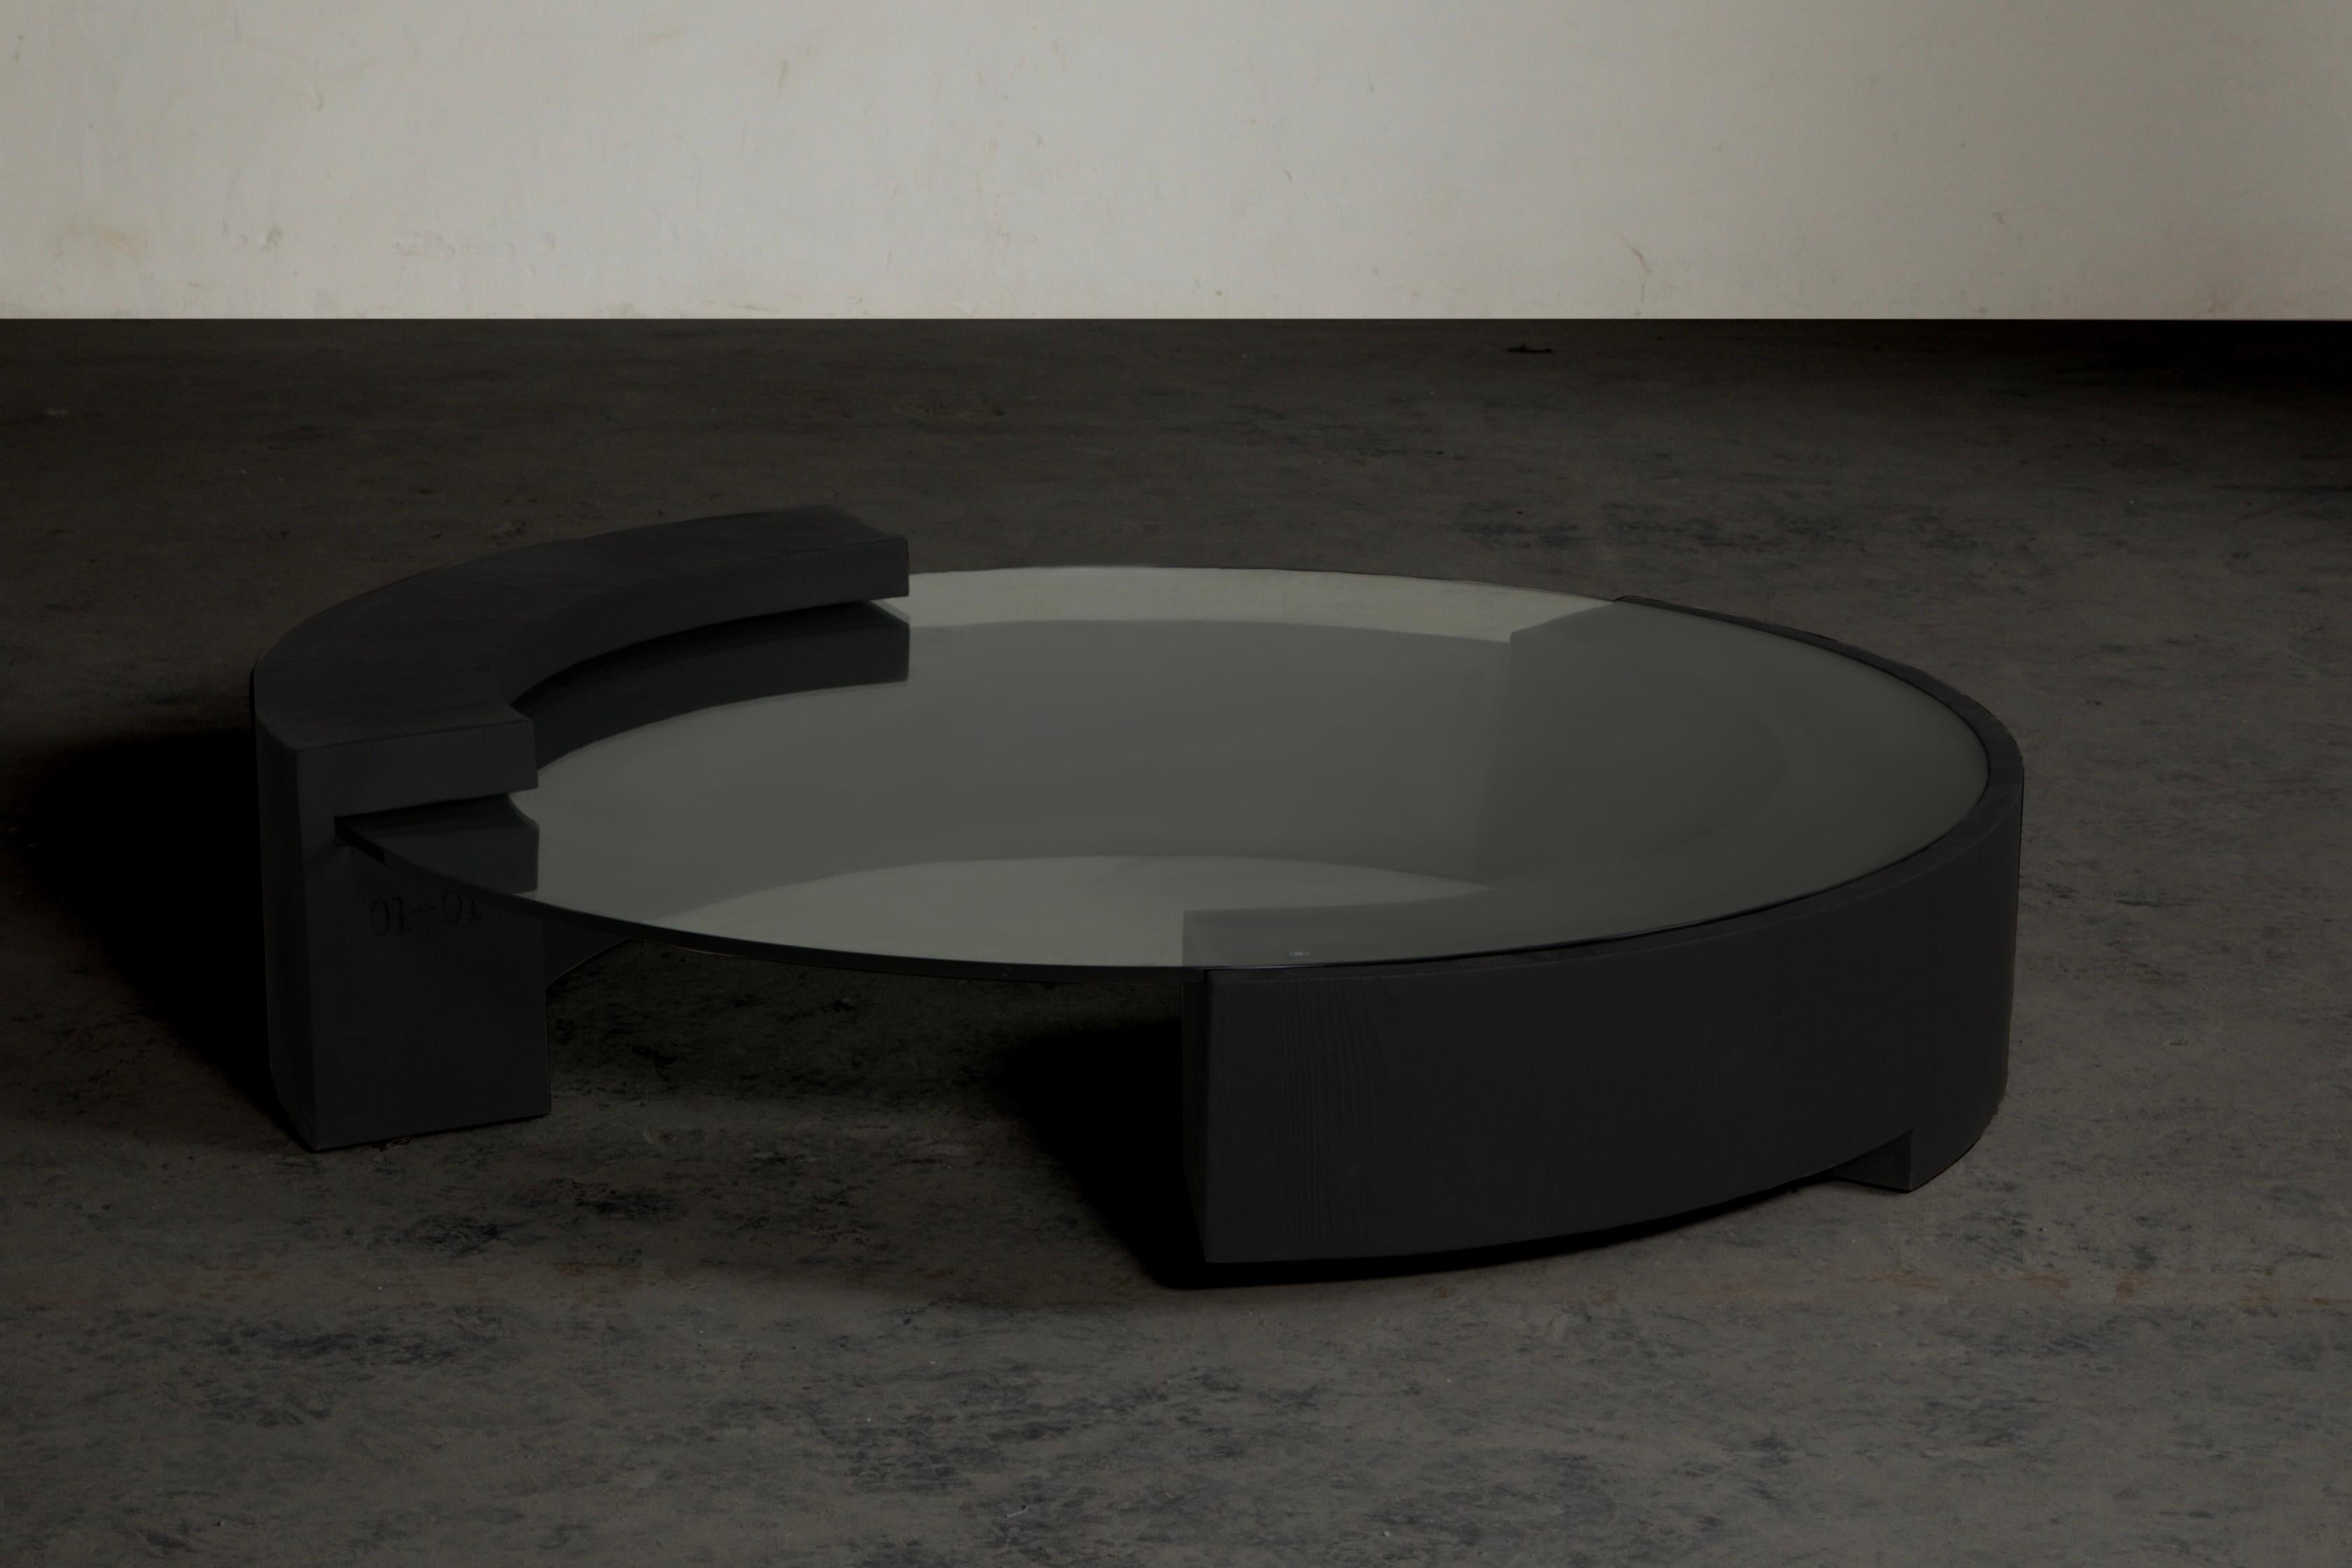 This cocktail table is designed by designers Diamant and Fu for Mirk Woo. In order to create retro avant-garde barbarism style furniture, solid wood carbonization and matte spray paint are used. The design inspiration comes from Roman Colosseum.